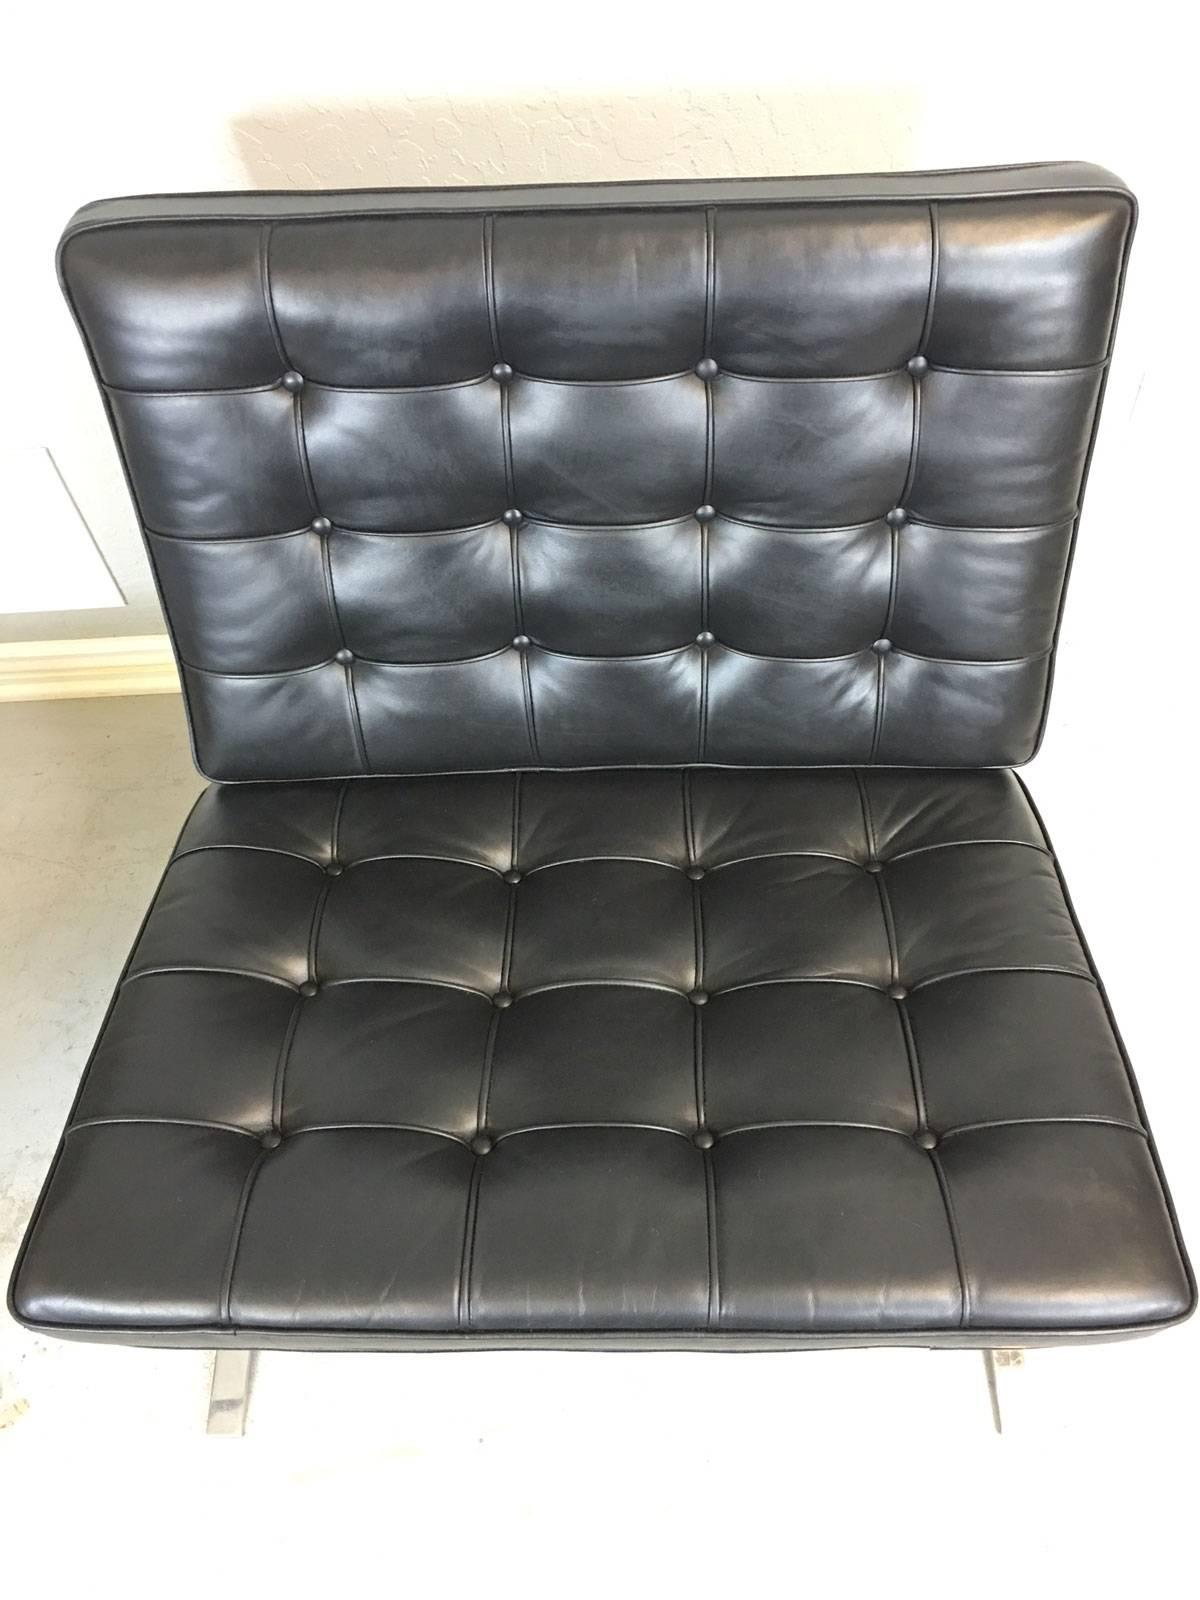 Mies van der Rohe Barcelona chairs for Knoll, circa 1960s. Leather is in exceptional condition. No rips, tears or holes. Straps are in excellent condition. All buttons present. Foam is very good. These Barcelona chairs are in excellent condition,